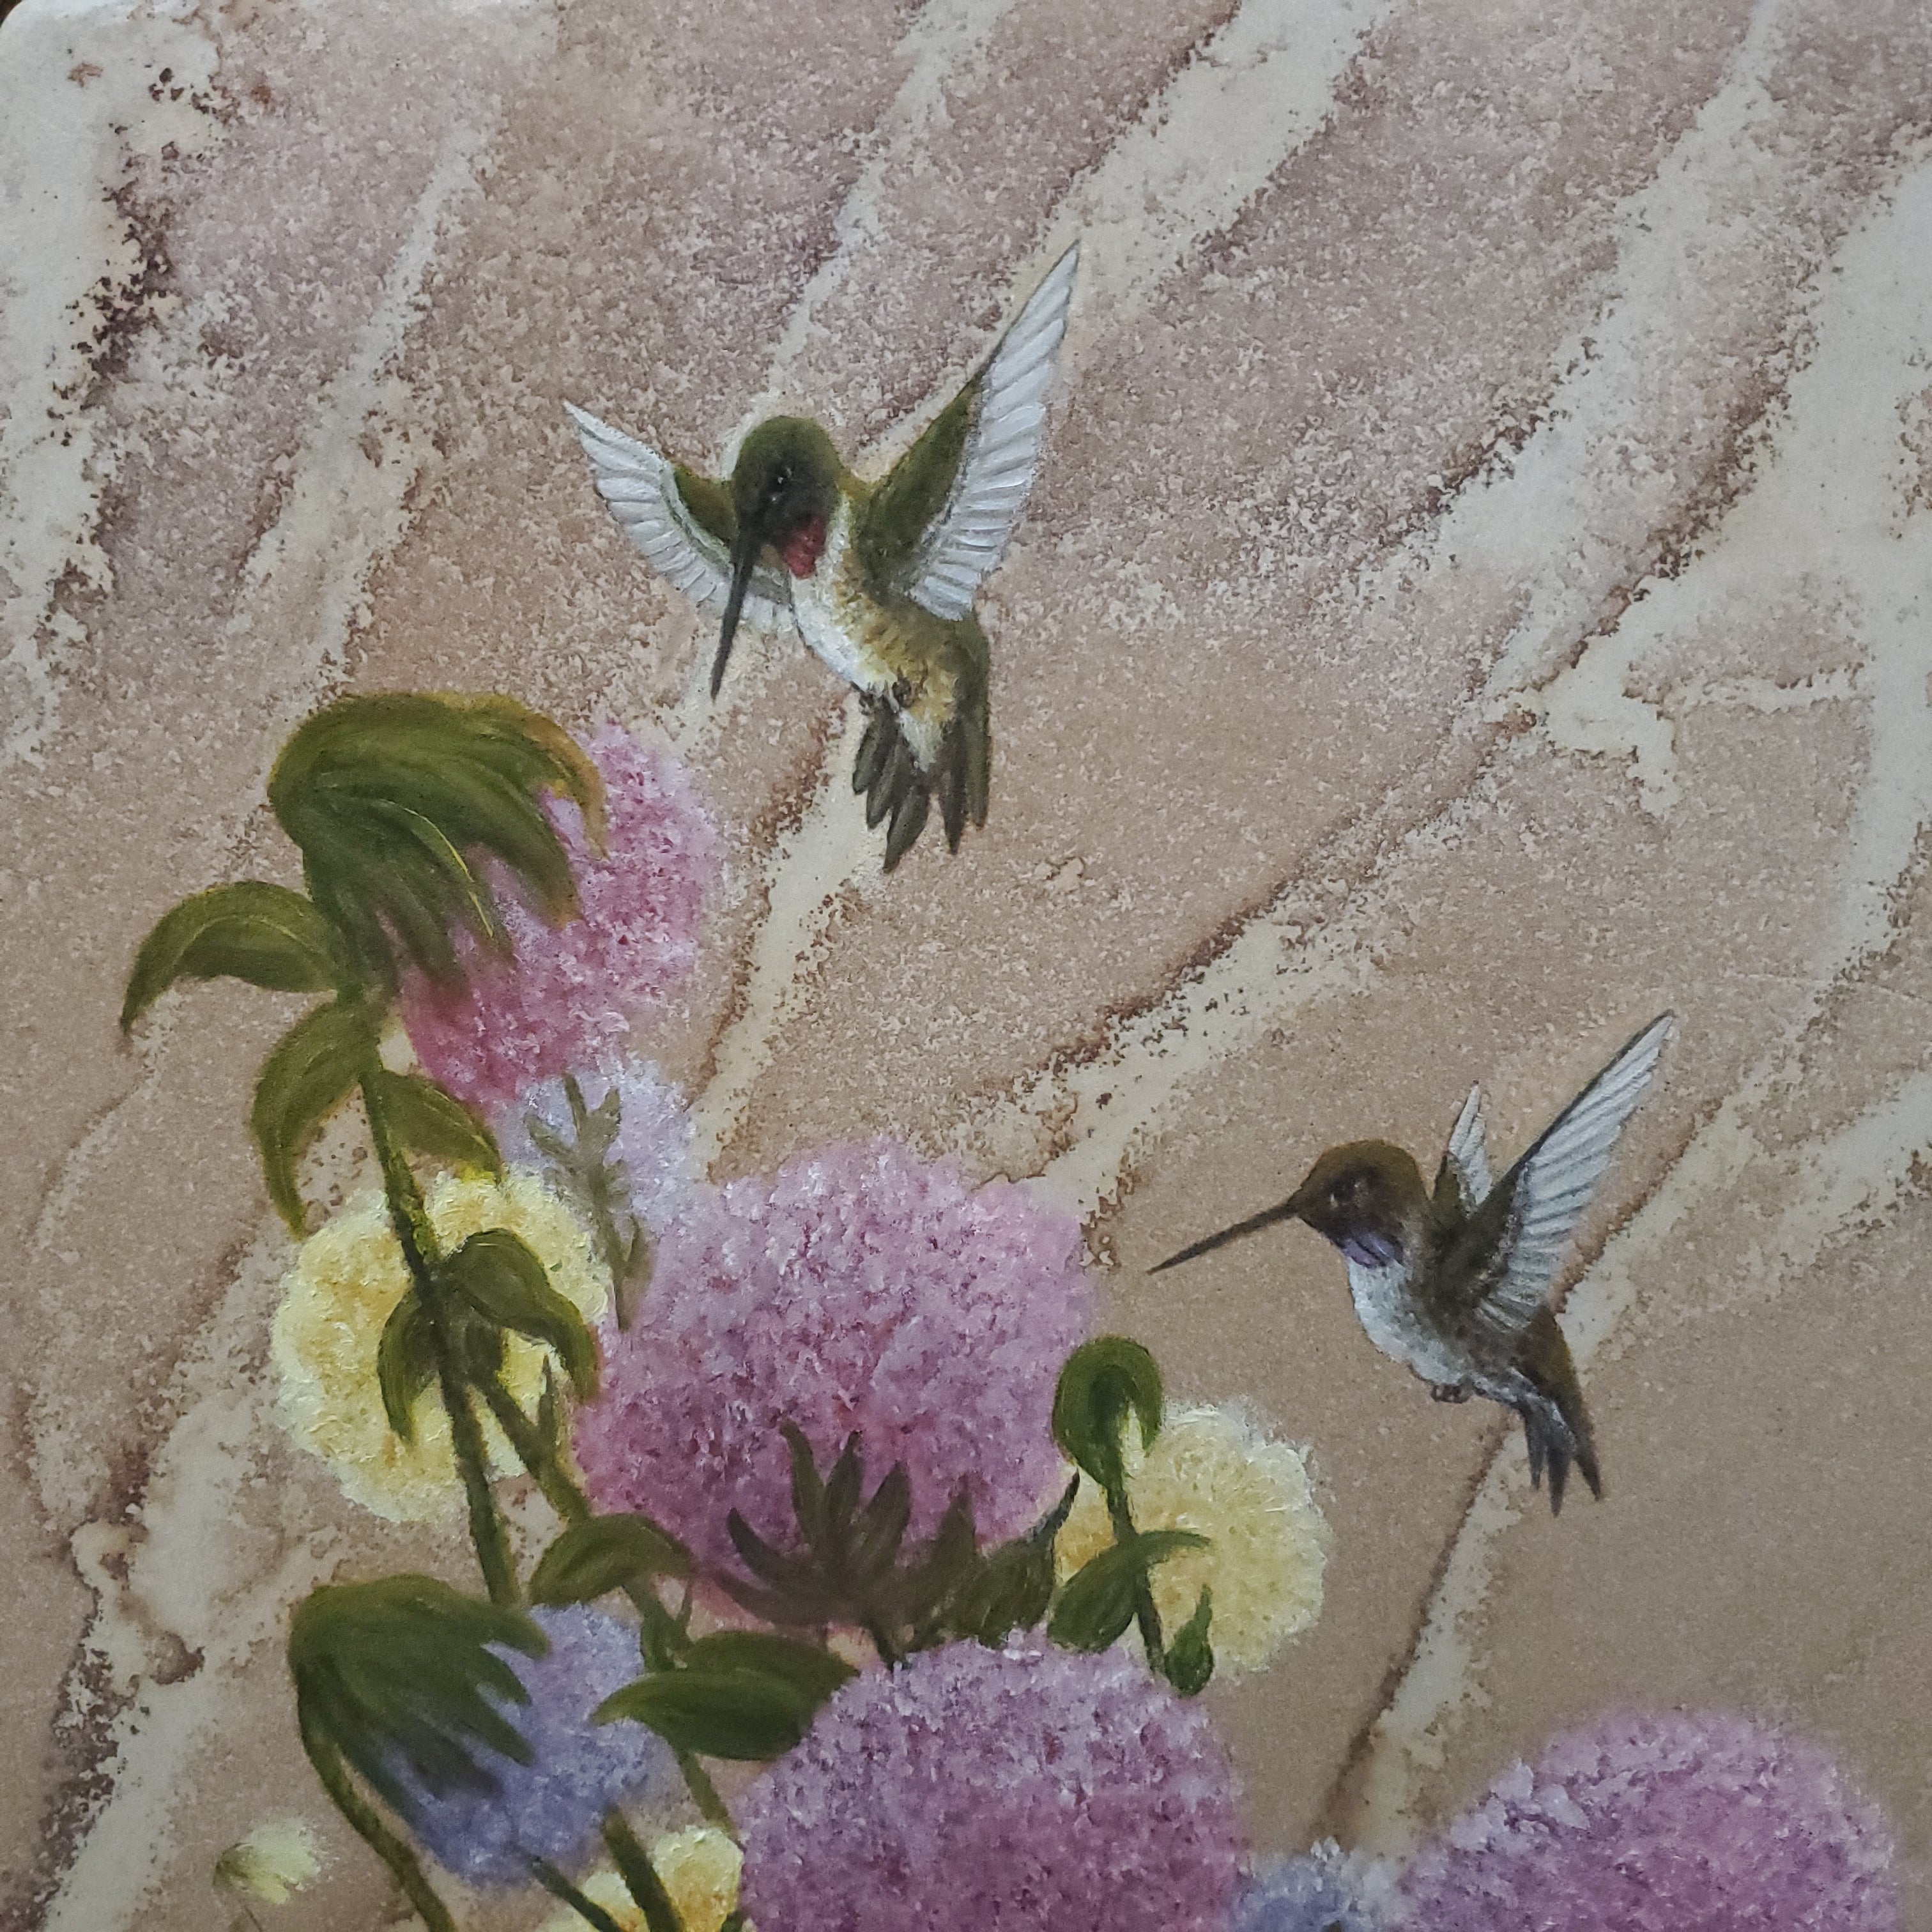 paintings of hummingbirds and flowers